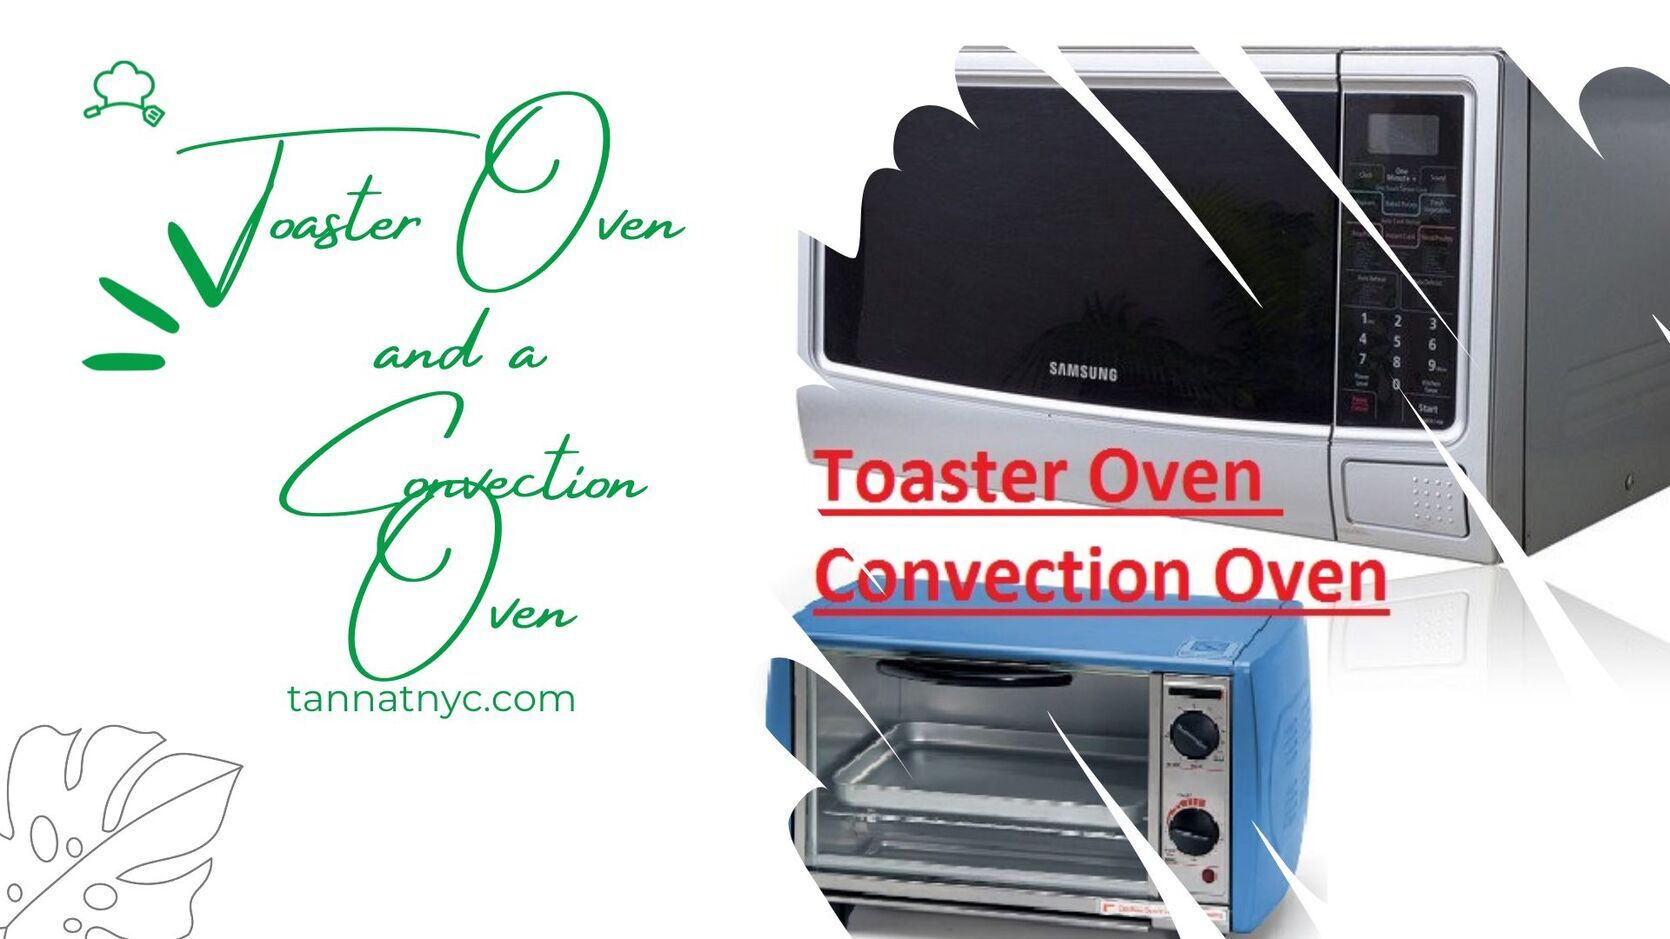 Toaster Oven and a Convection Oven